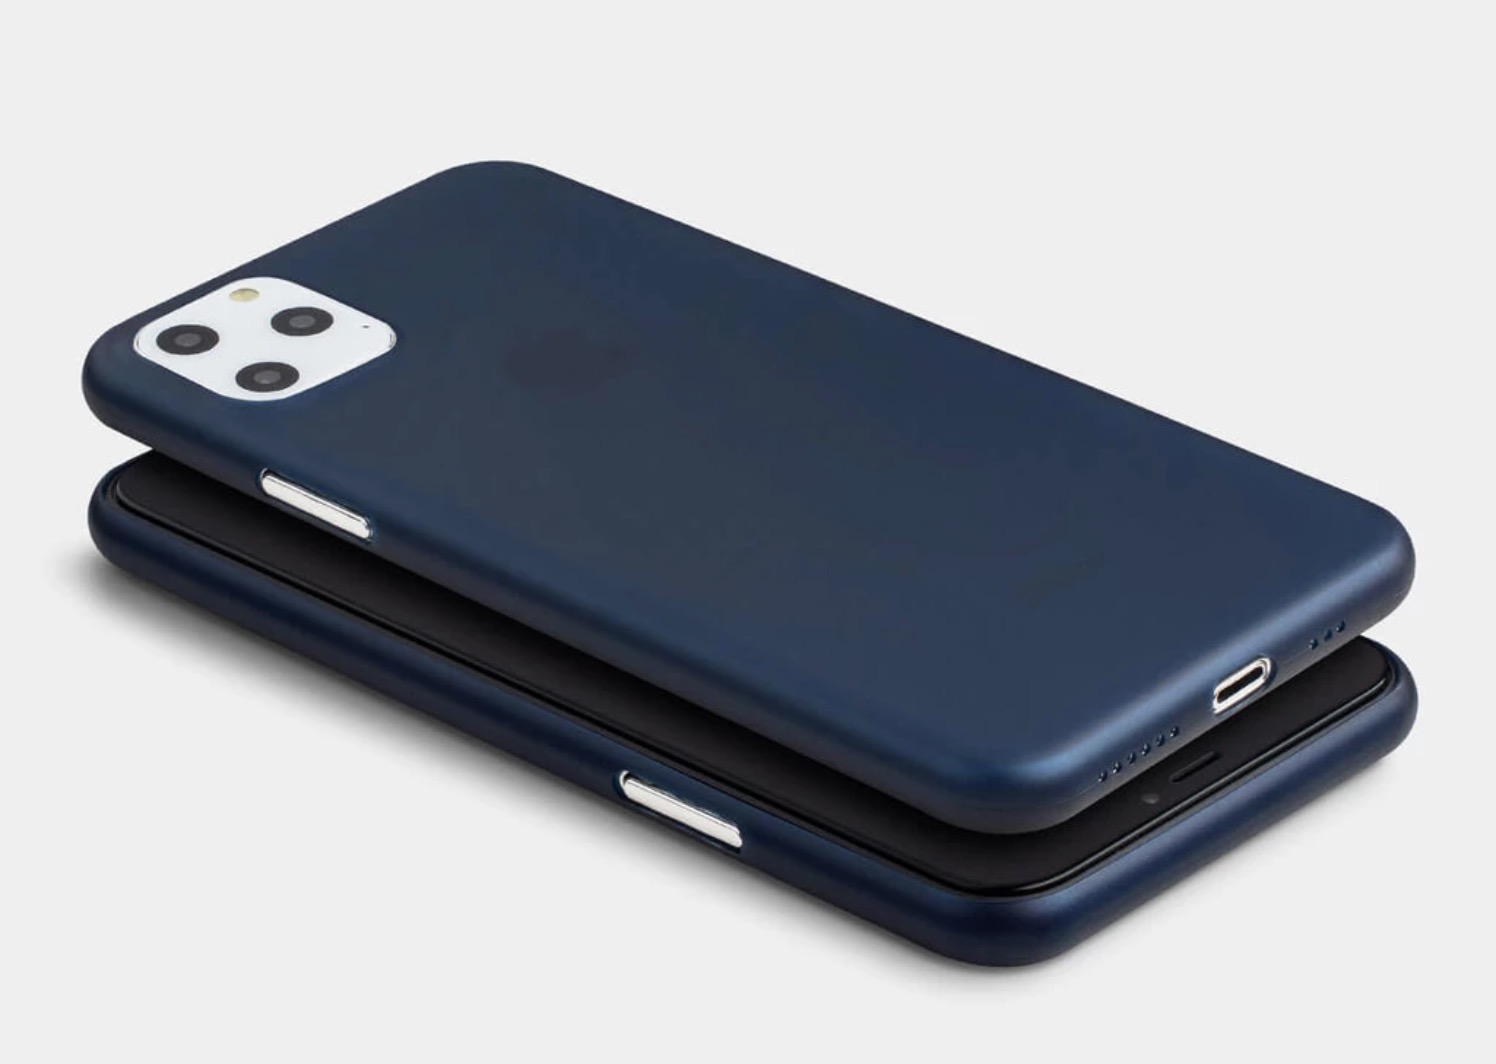 iPhone 11 Pro case from Totallee